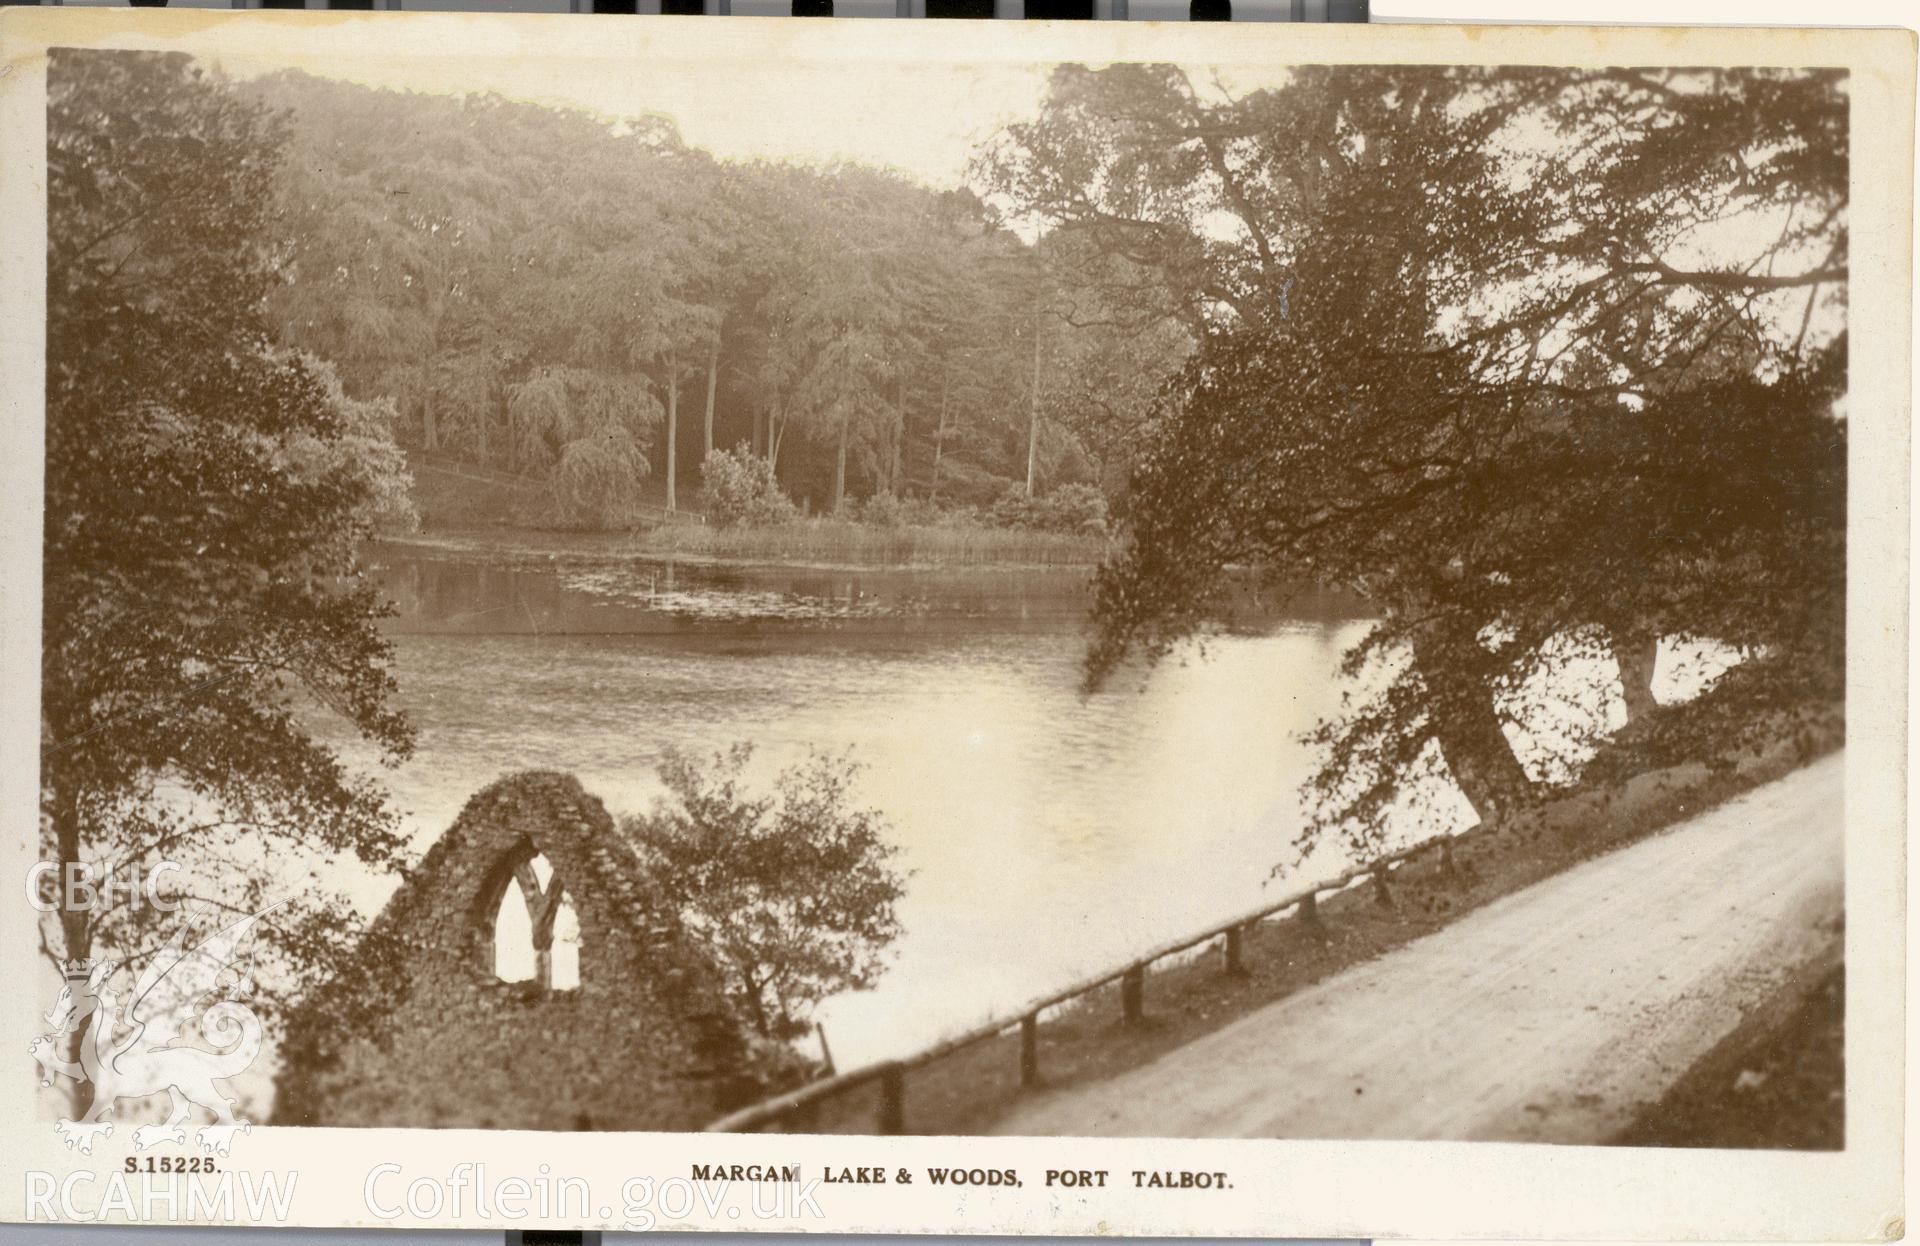 Digitised postcard image of the lake, Margam park gardens, Kingsway Real Photo Series. Produced by Parks and Gardens Data Services, from an original item in the Peter Davis Collection at Parks and Gardens UK. We hold only web-resolution images of this collection, suitable for viewing on screen and for research purposes only. We do not hold the original images, or publication quality scans.